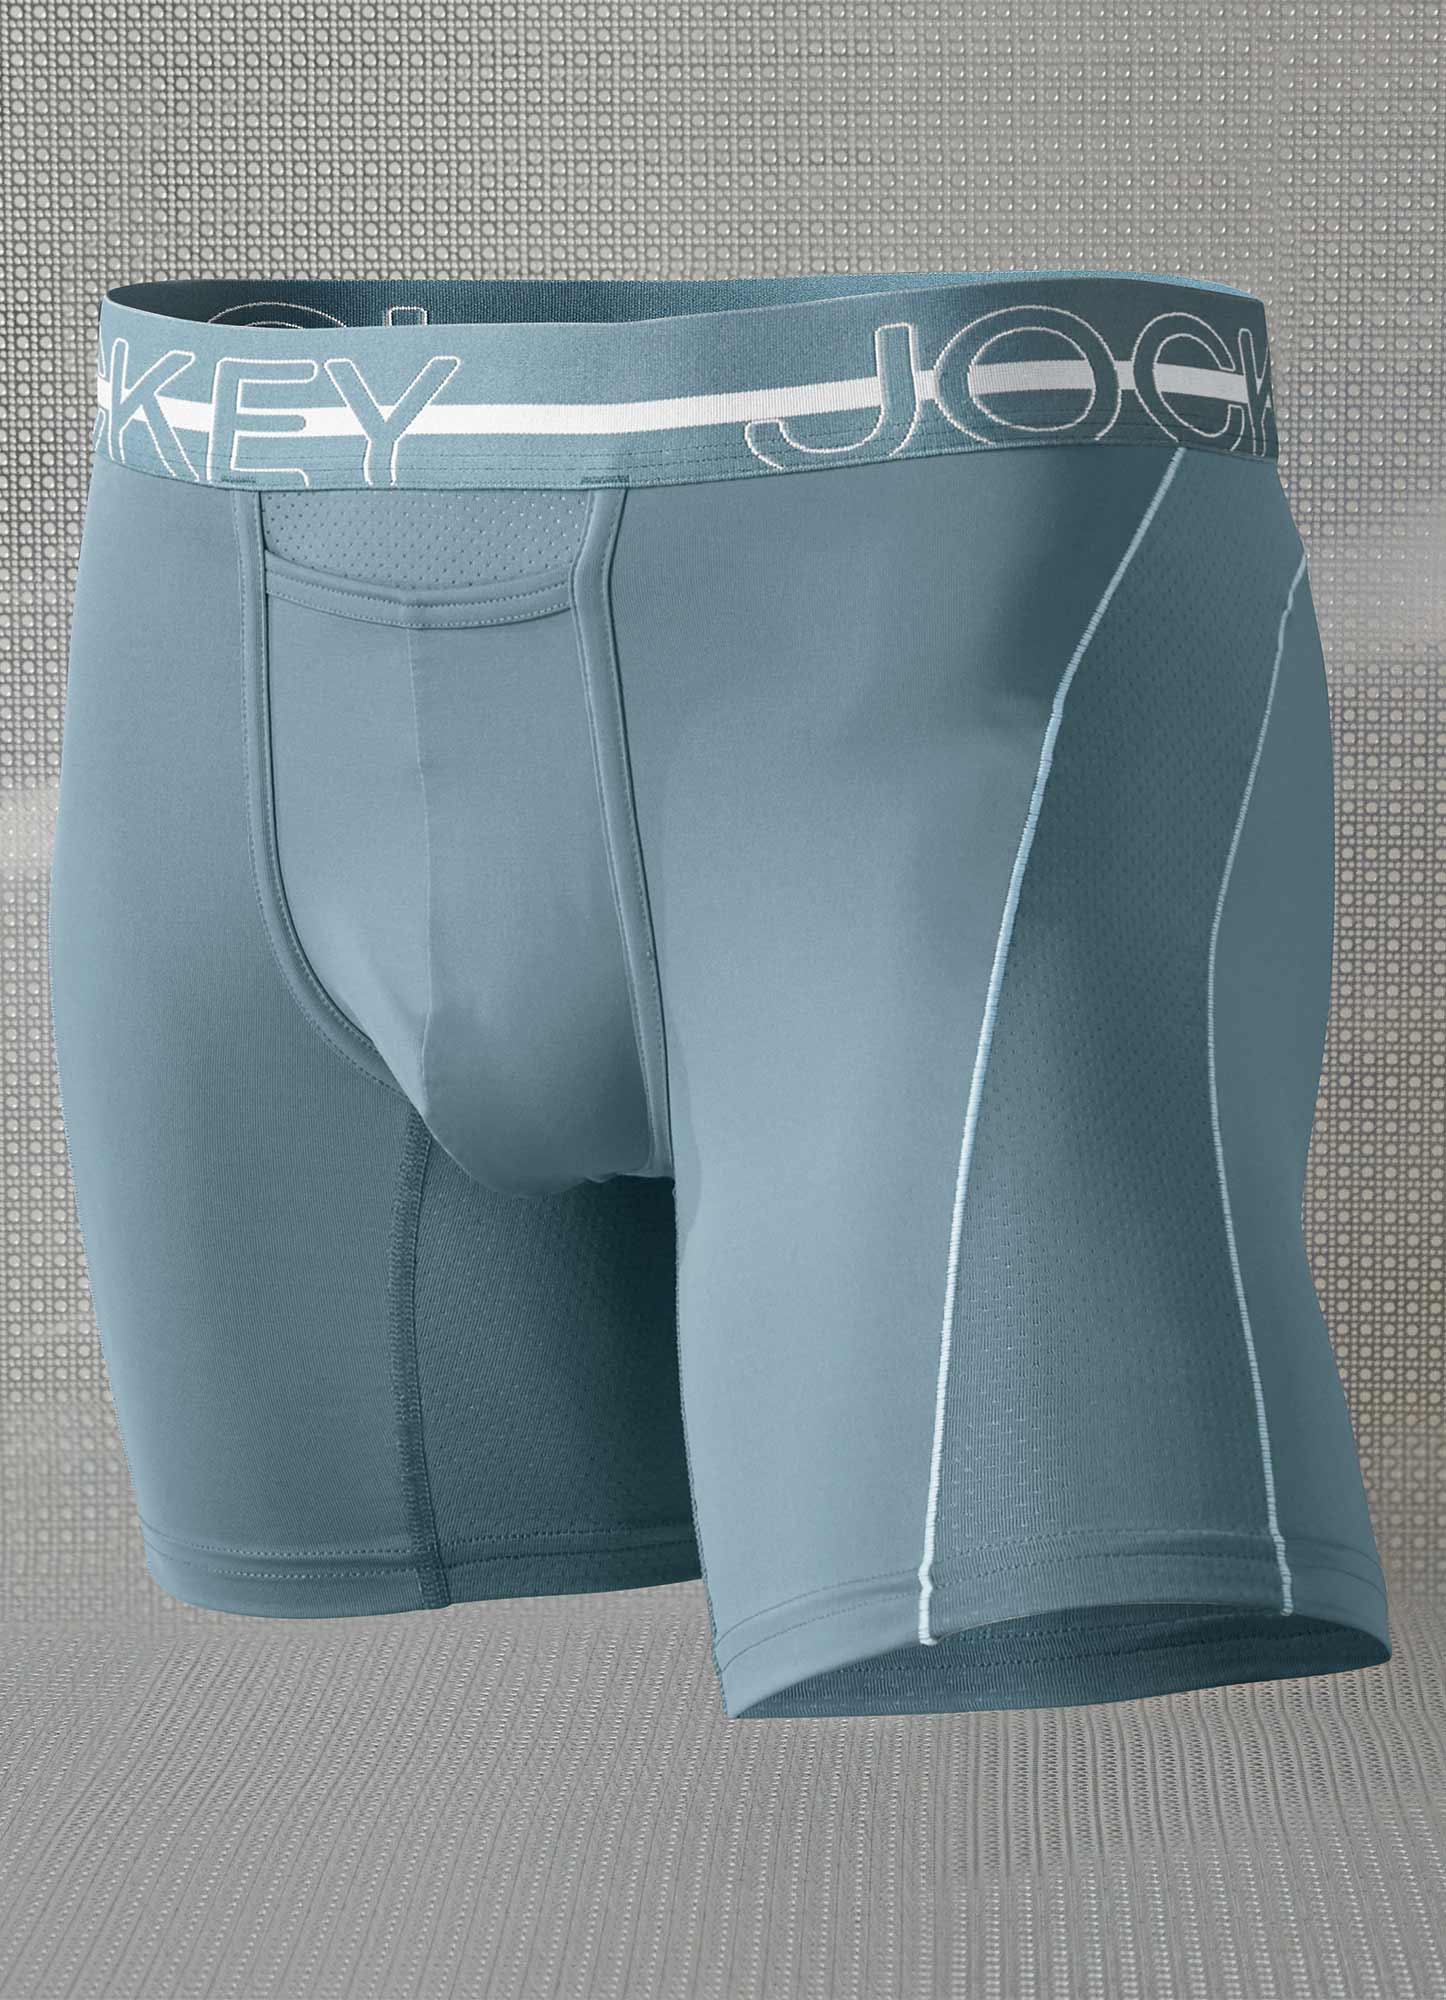 SilverTech - Odorless Underwear Made with Pure Silver by Organic